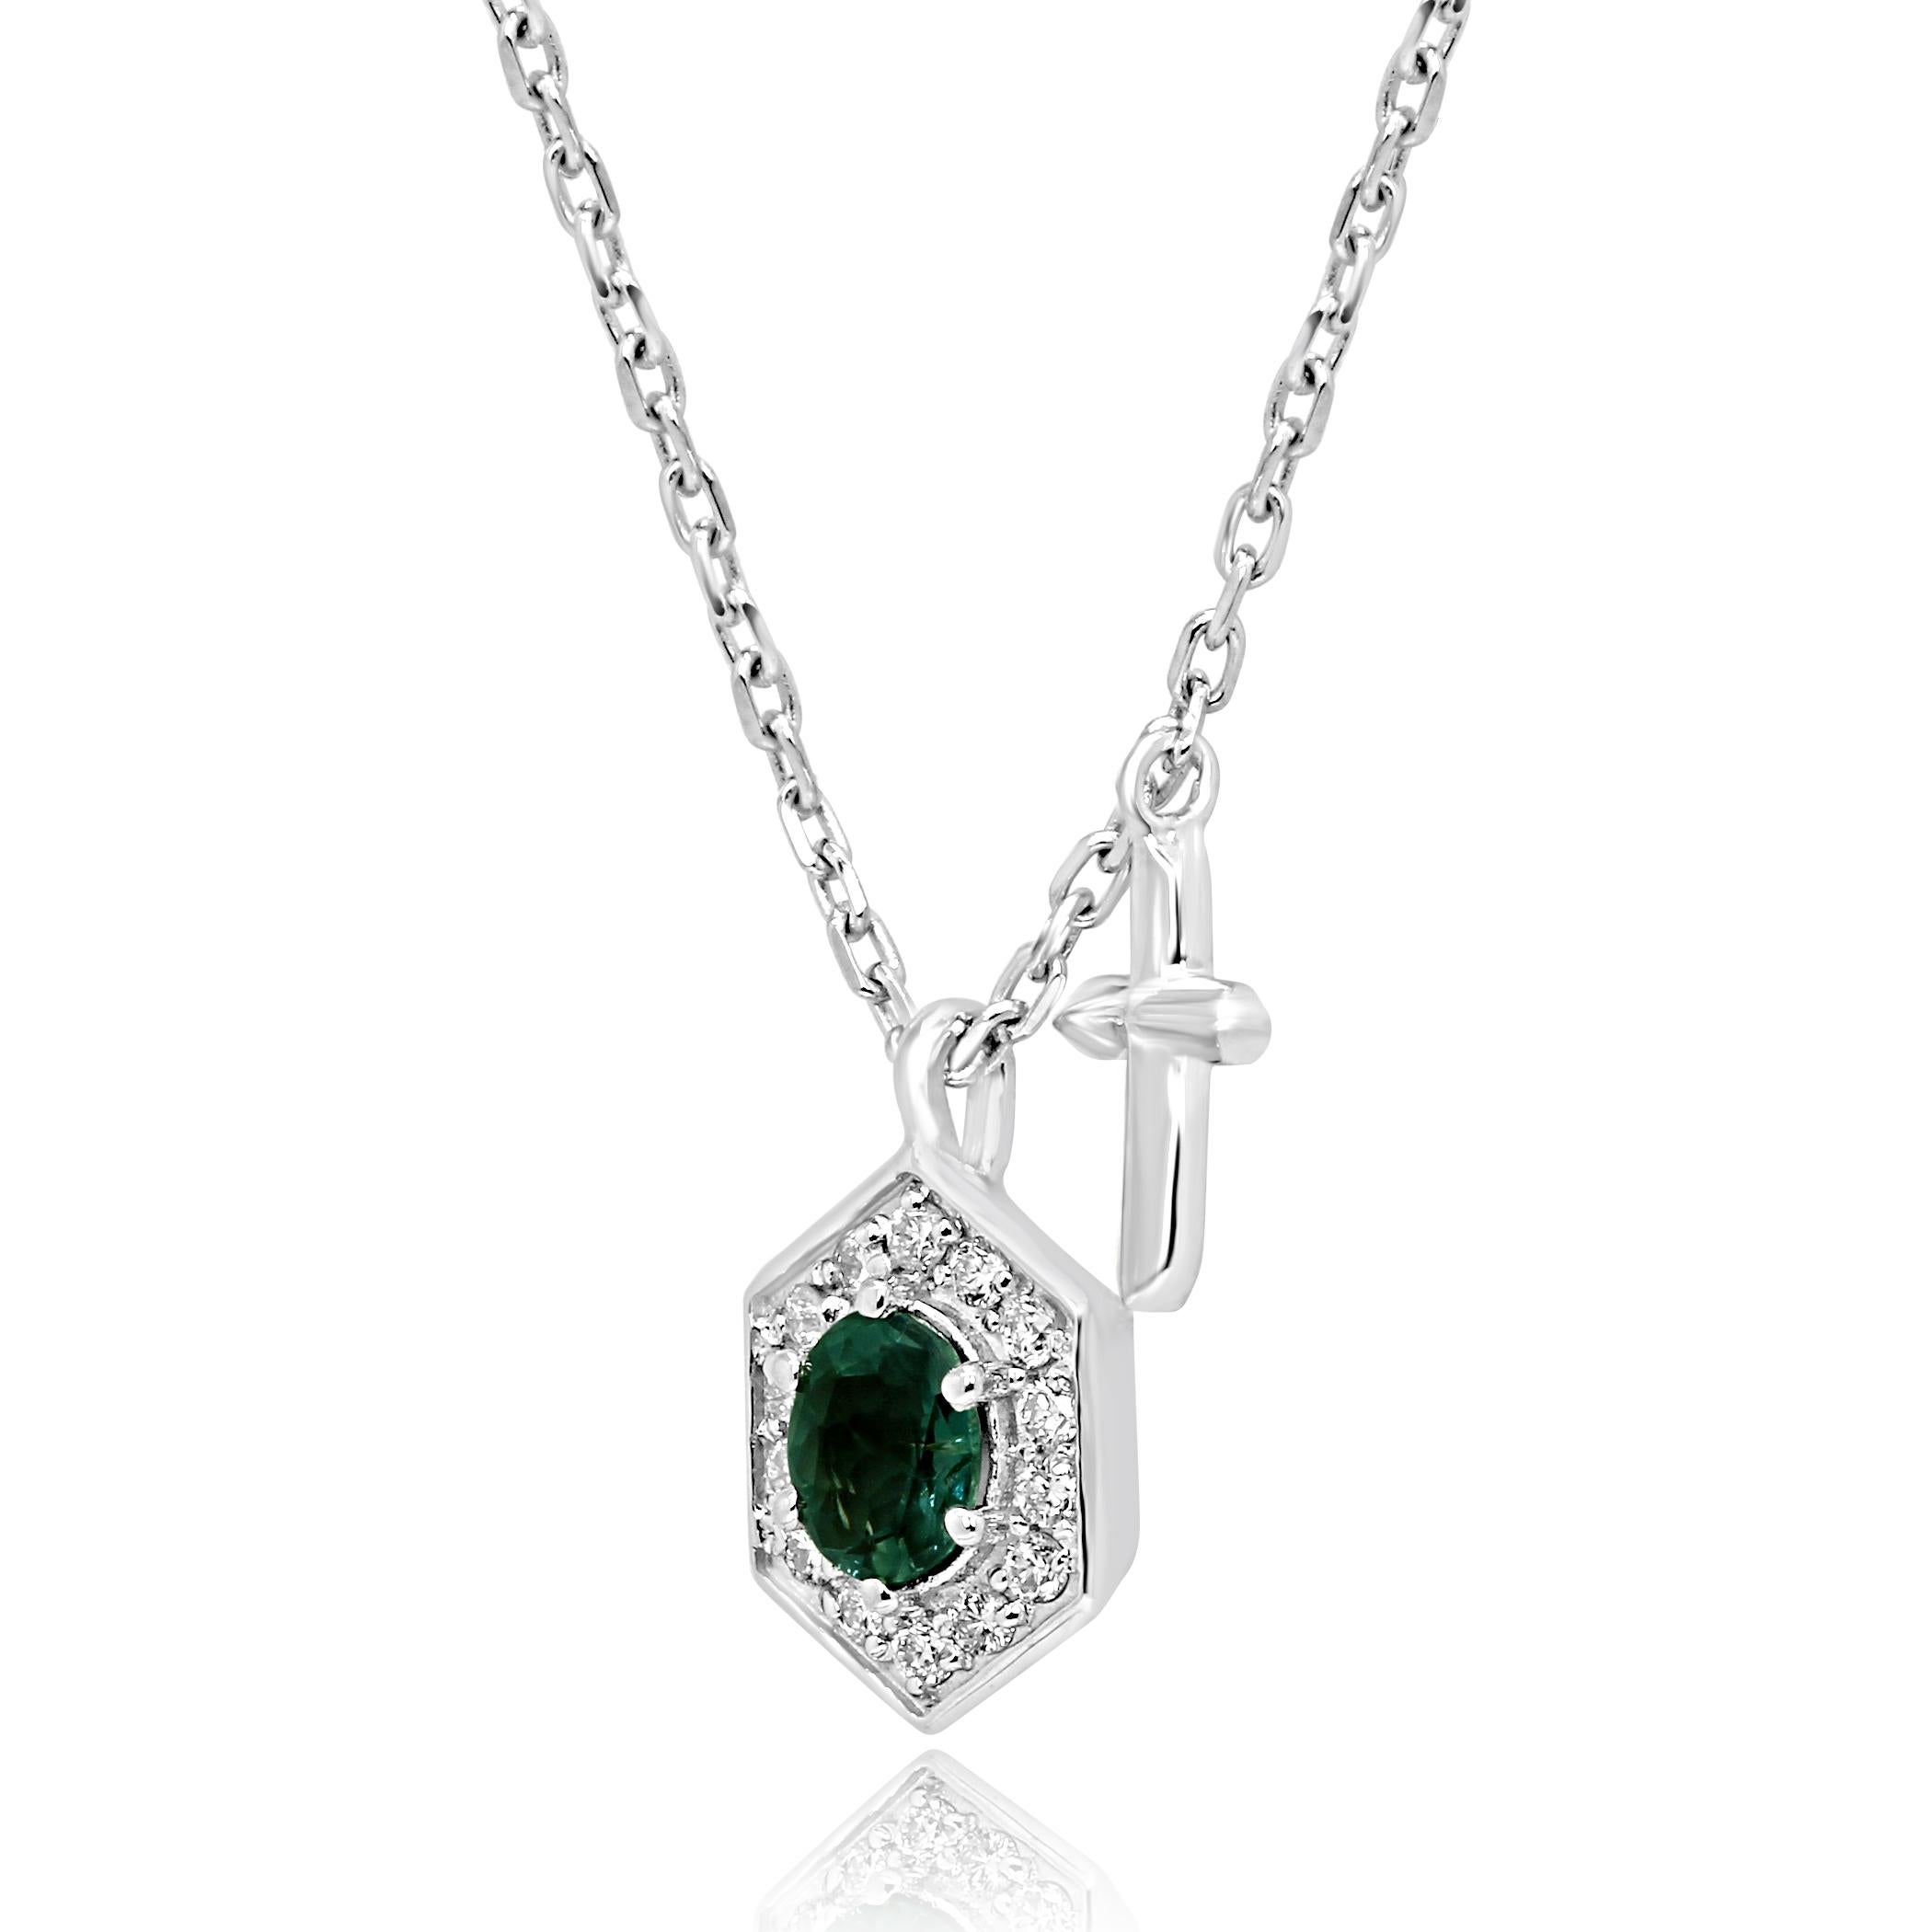 1 Natural Alexandrite Oval 0.40 Carat encircled in a Halo of White Colorless G-H Diamond Rounds SI clarity 0.15 Carat in 14K White Gold Everyday Wear Drop Pendant Chain Necklace.

MADE IN USA
Center Alexandrite Weight 0.40 Carat
Total Diamond Weight